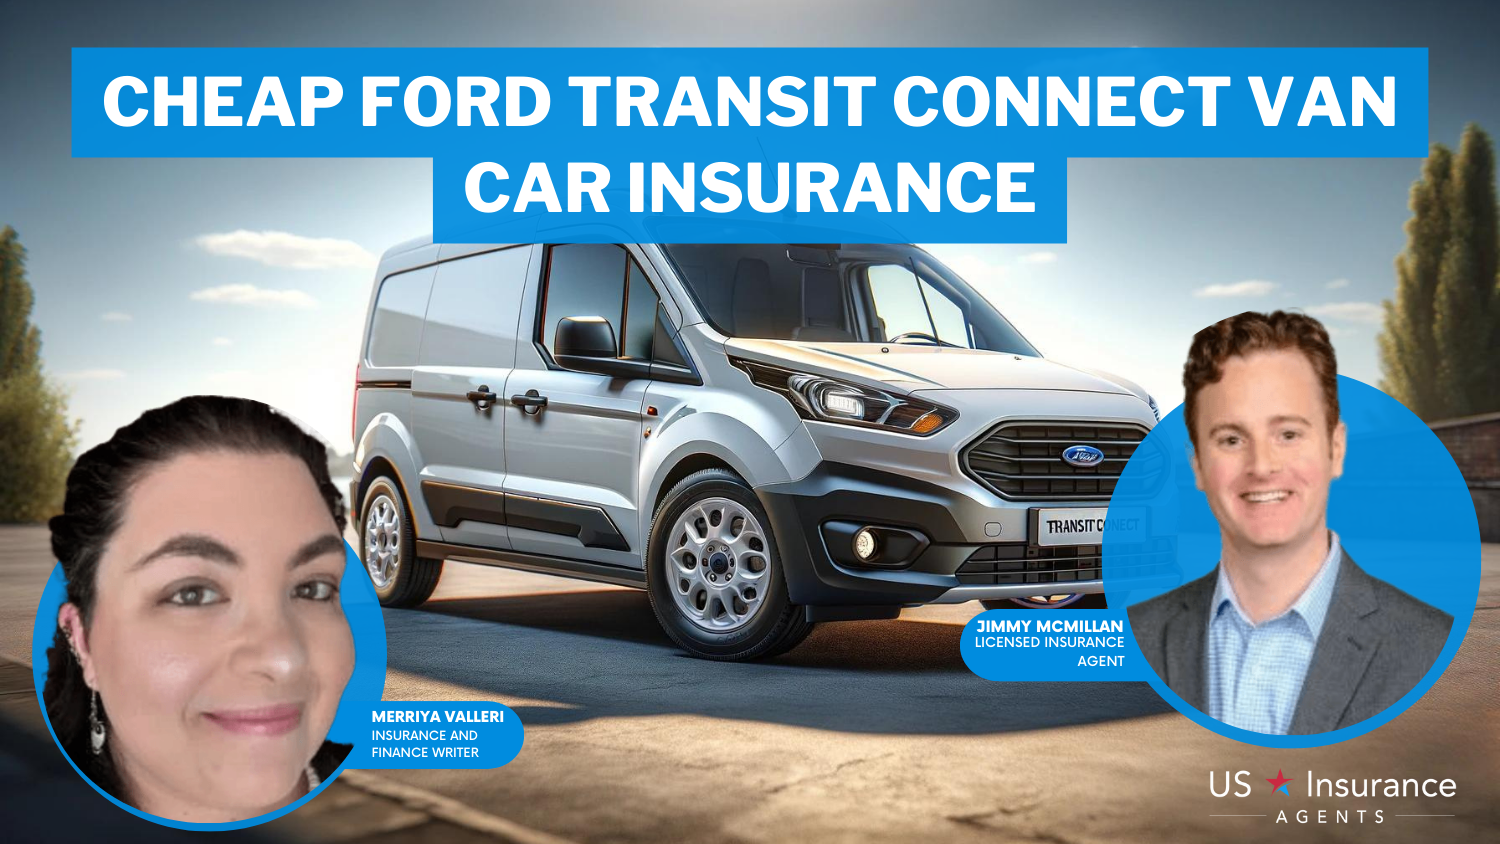 Cheap Ford Transit Connect Van Car Insurance: Mercury, AAA, and Erie